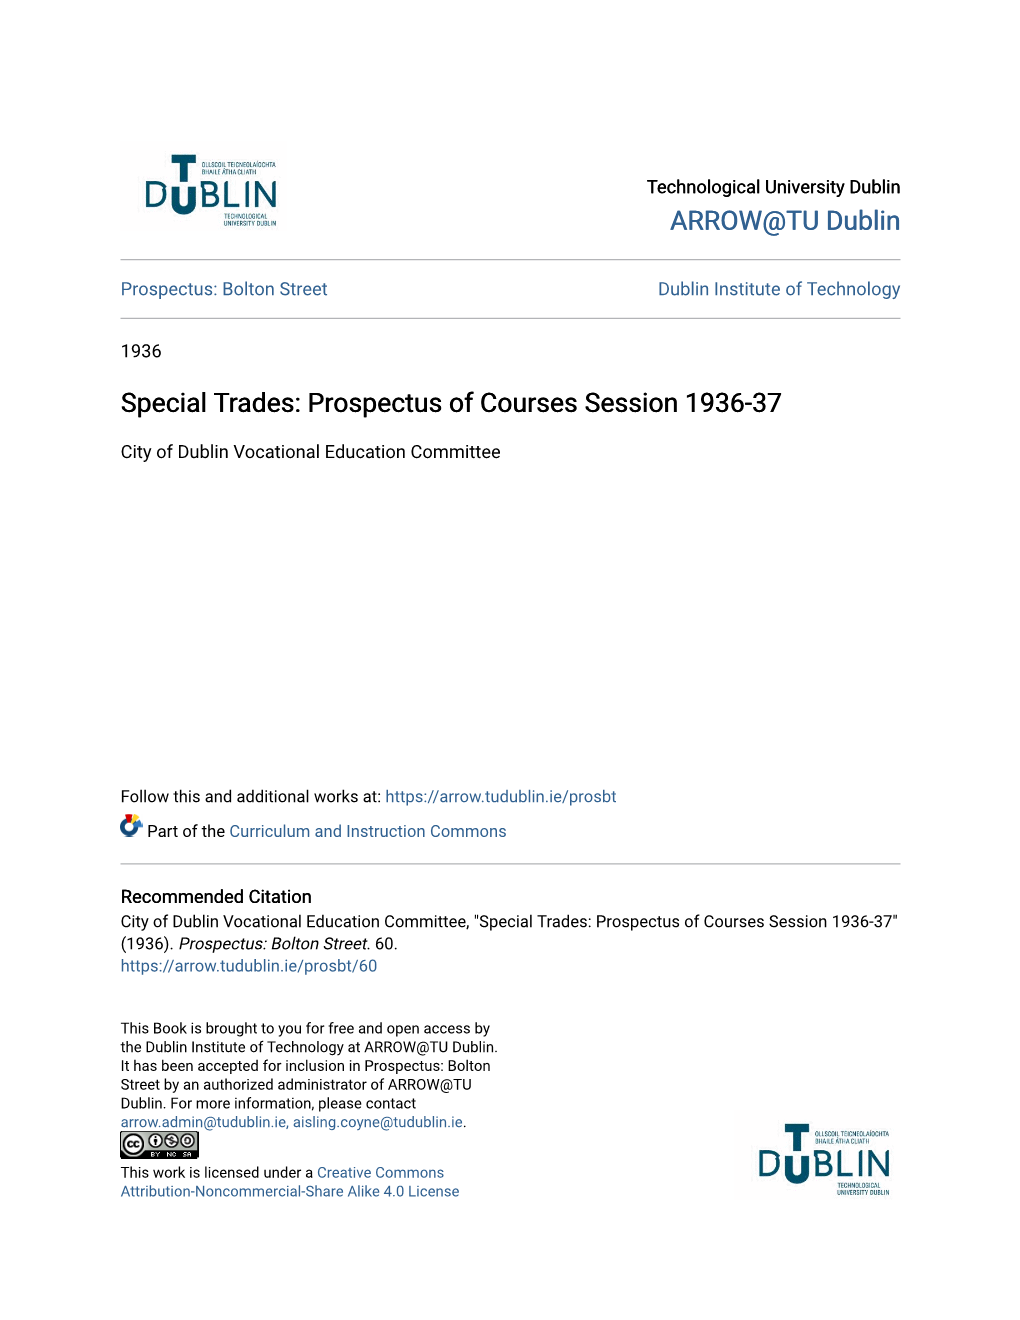 Special Trades: Prospectus of Courses Session 1936-37